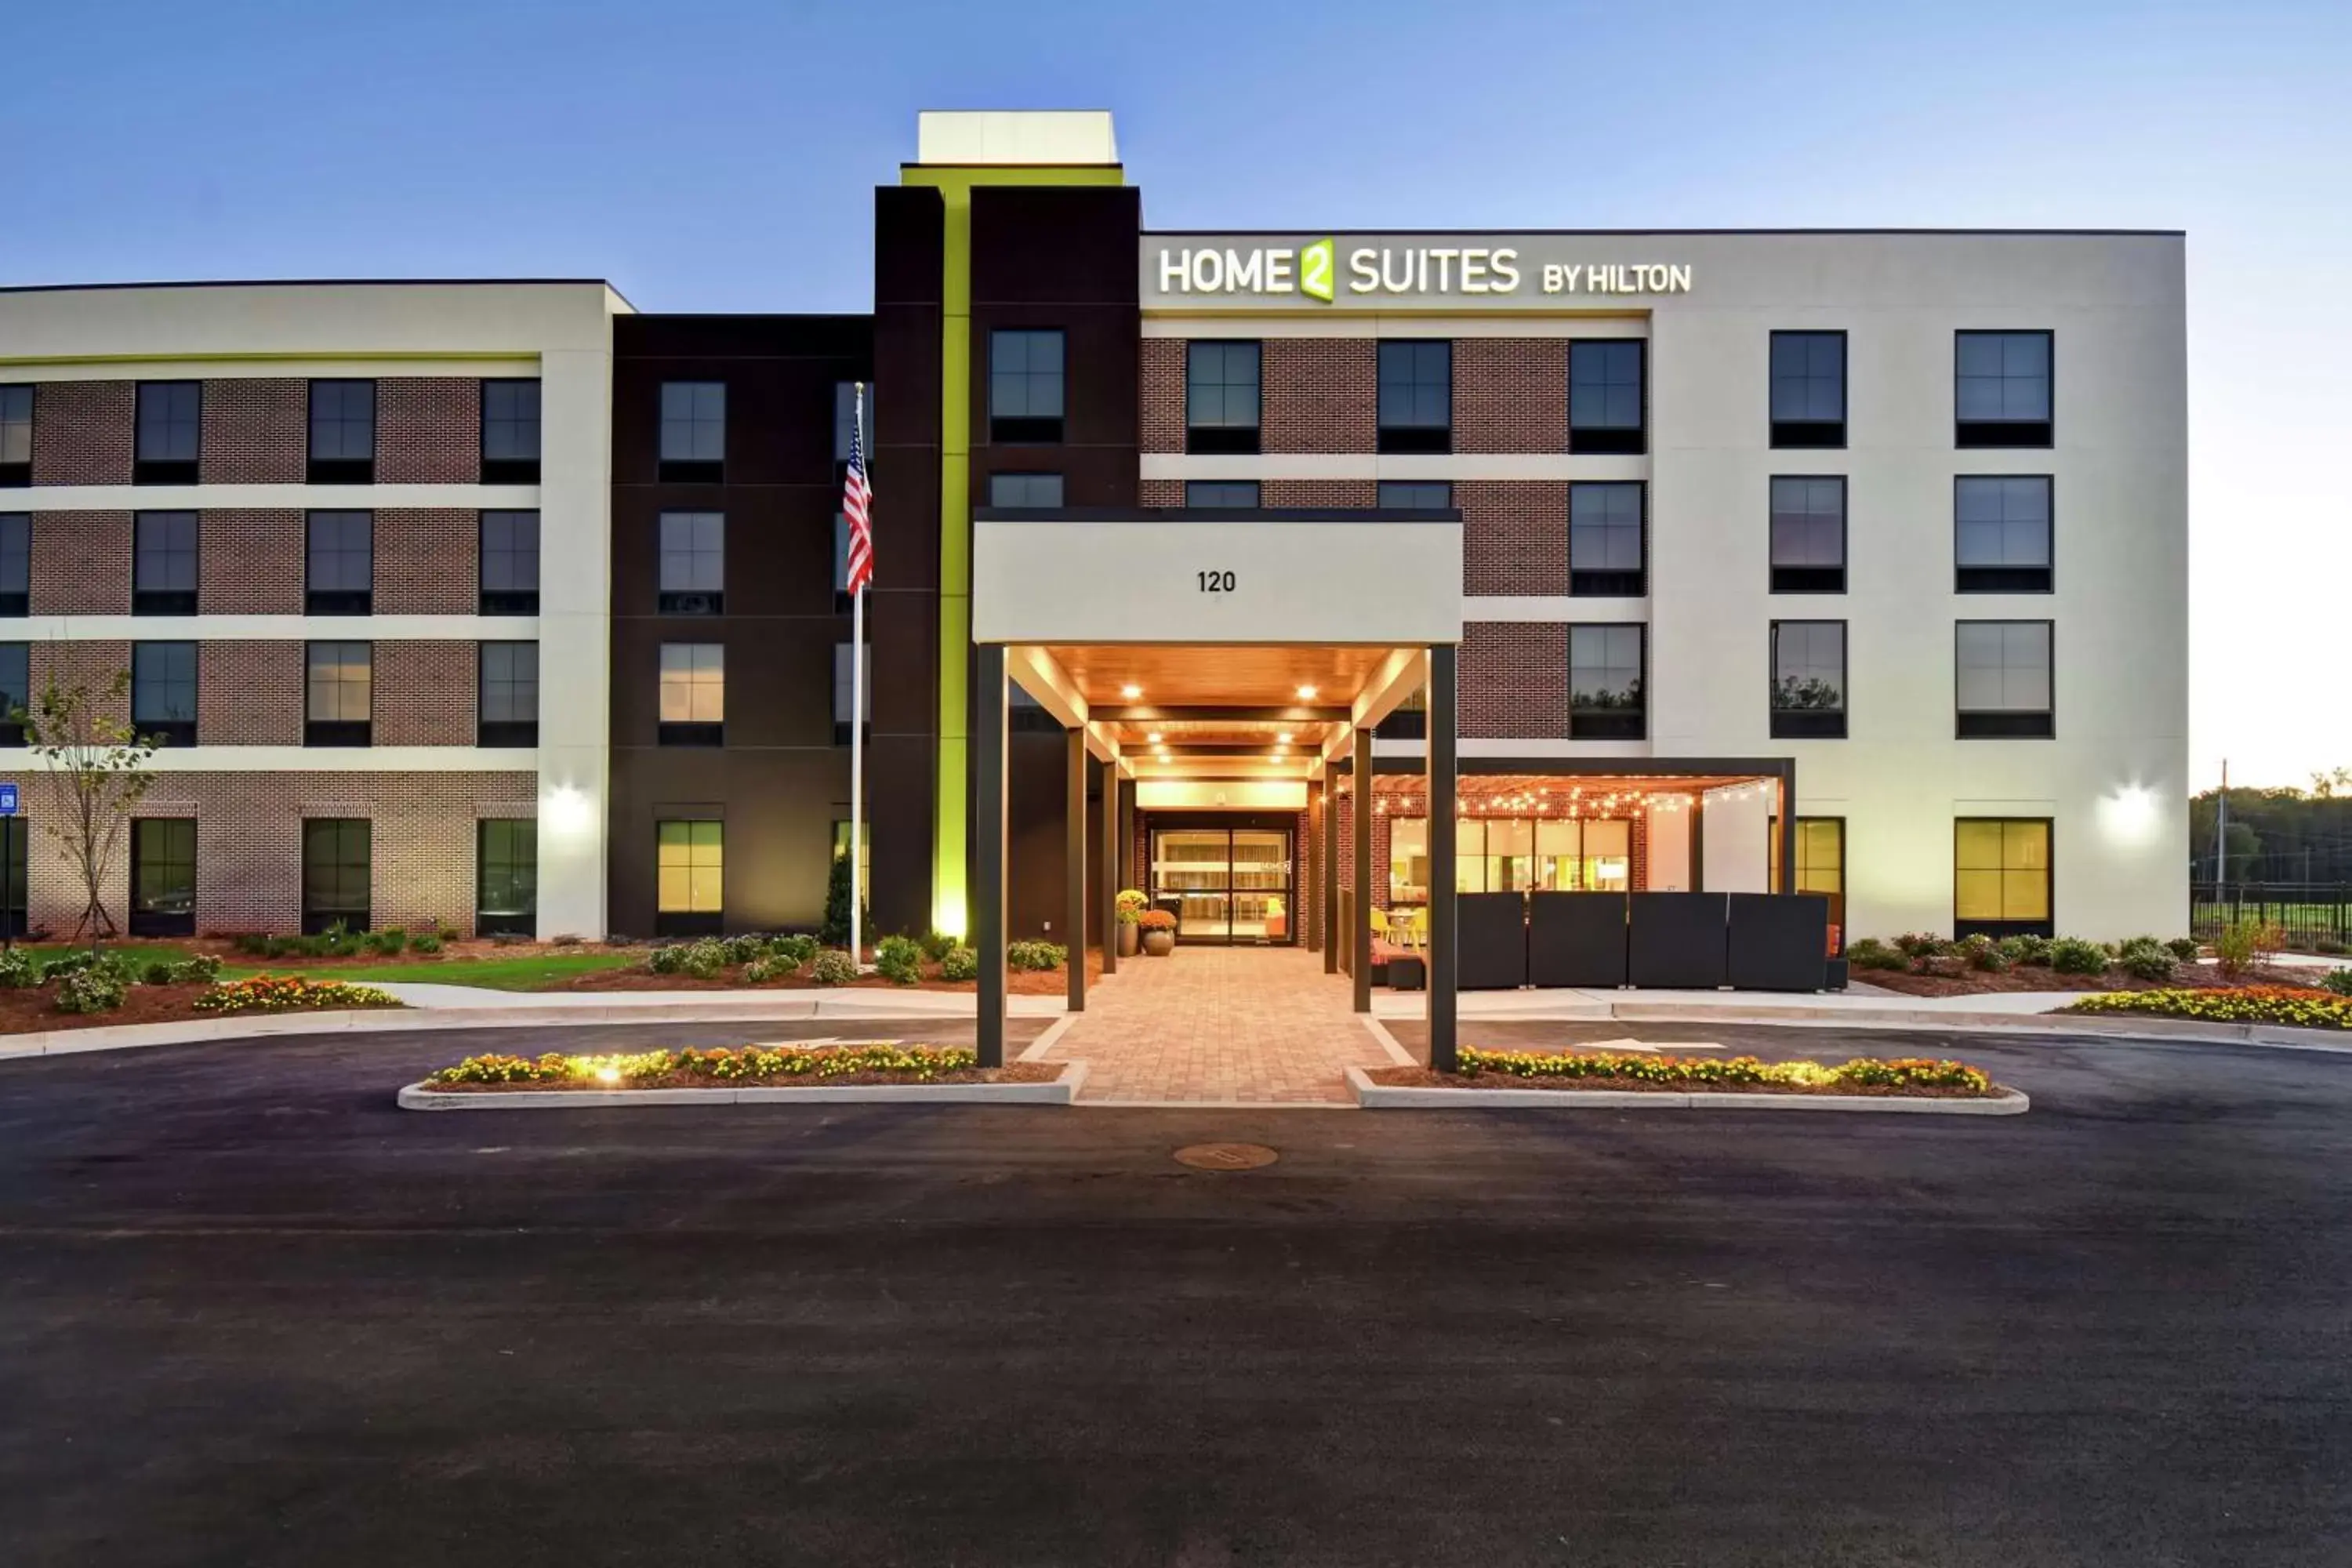 Property Building in Home2 Suites By Hilton Lagrange